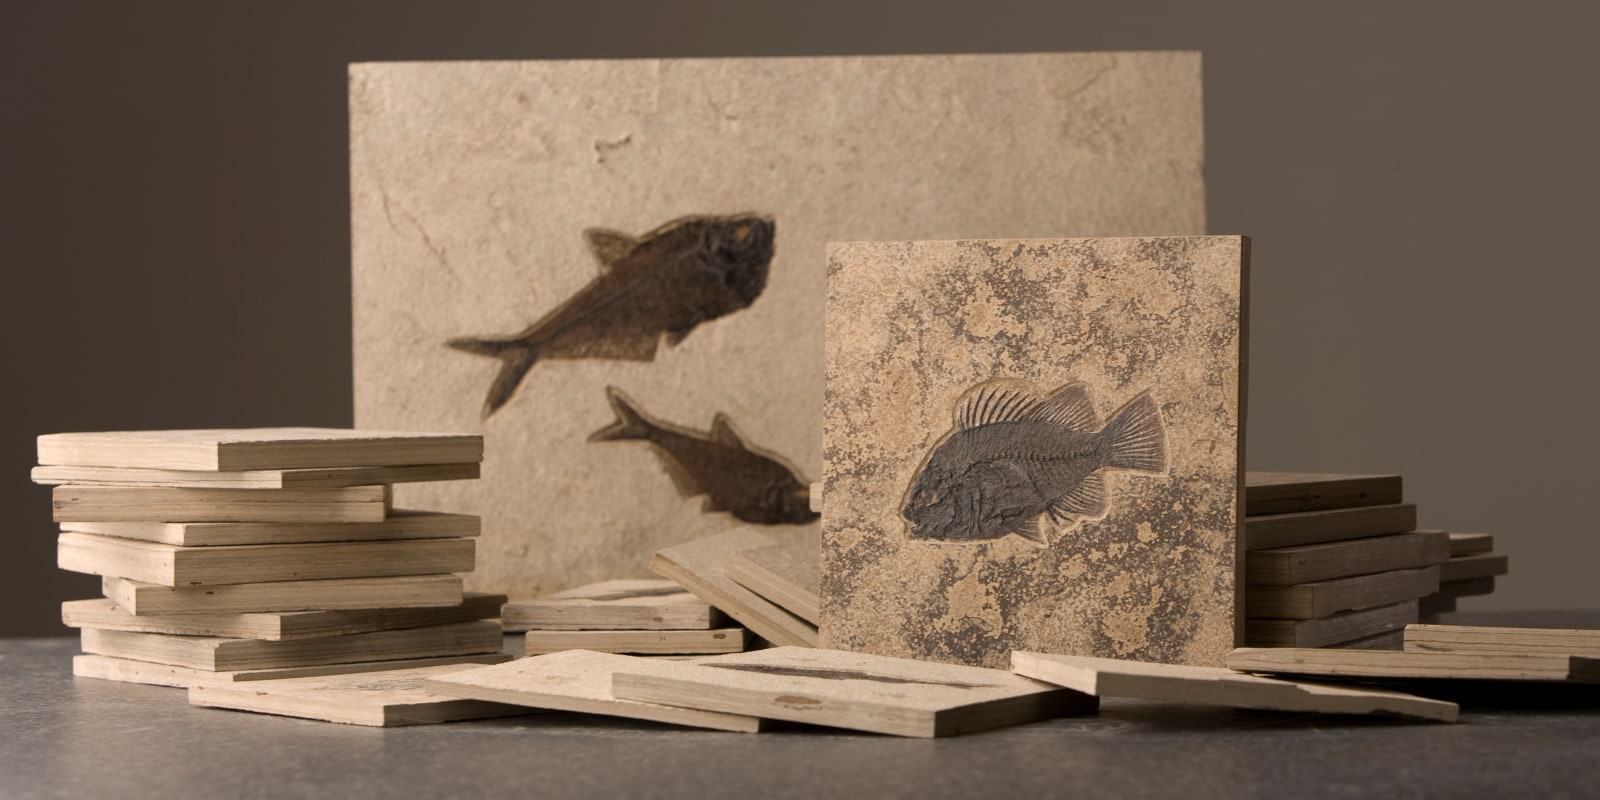 Selection of Fossil Tiles from Green River Fossil Company